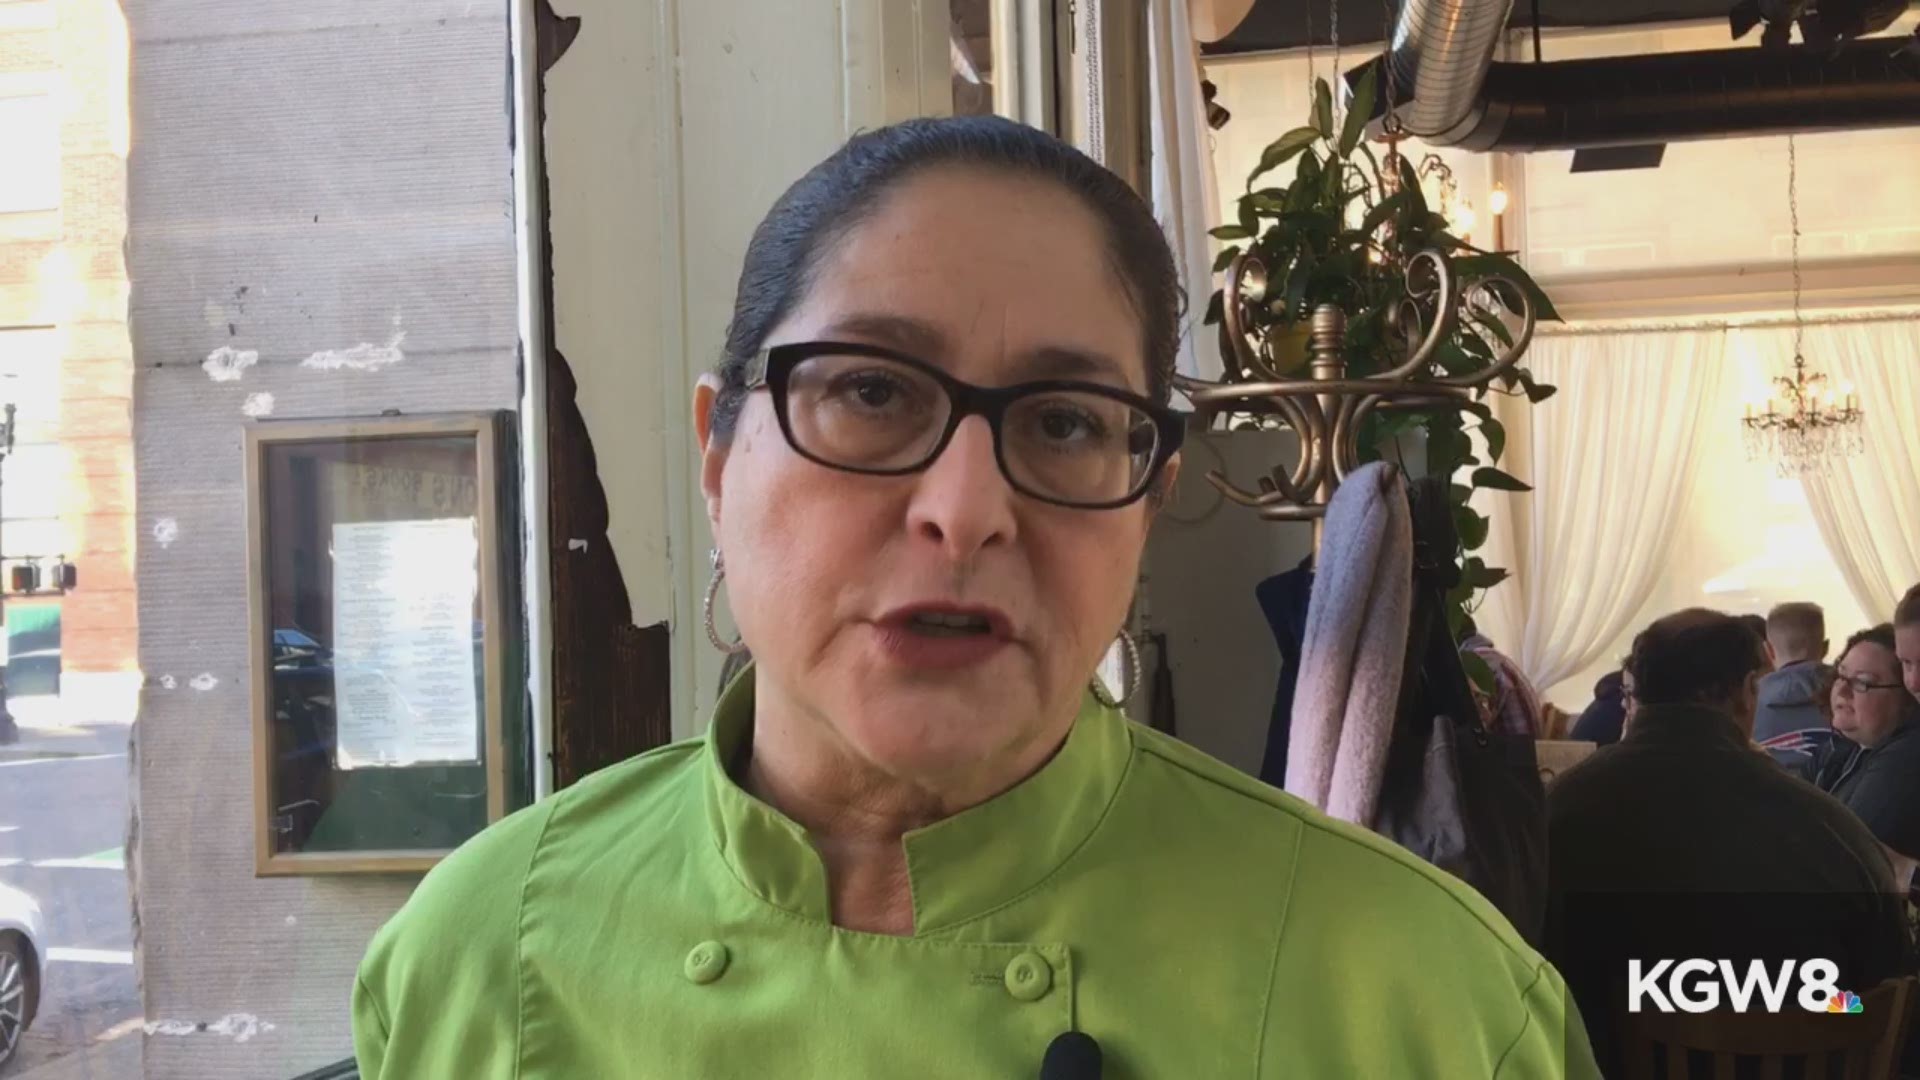 "I'd been really lobbying for seismic upgrading. I really feel that we all deserve to be in a secure building," executive chef and owner Lisa Schroeder told KGW.